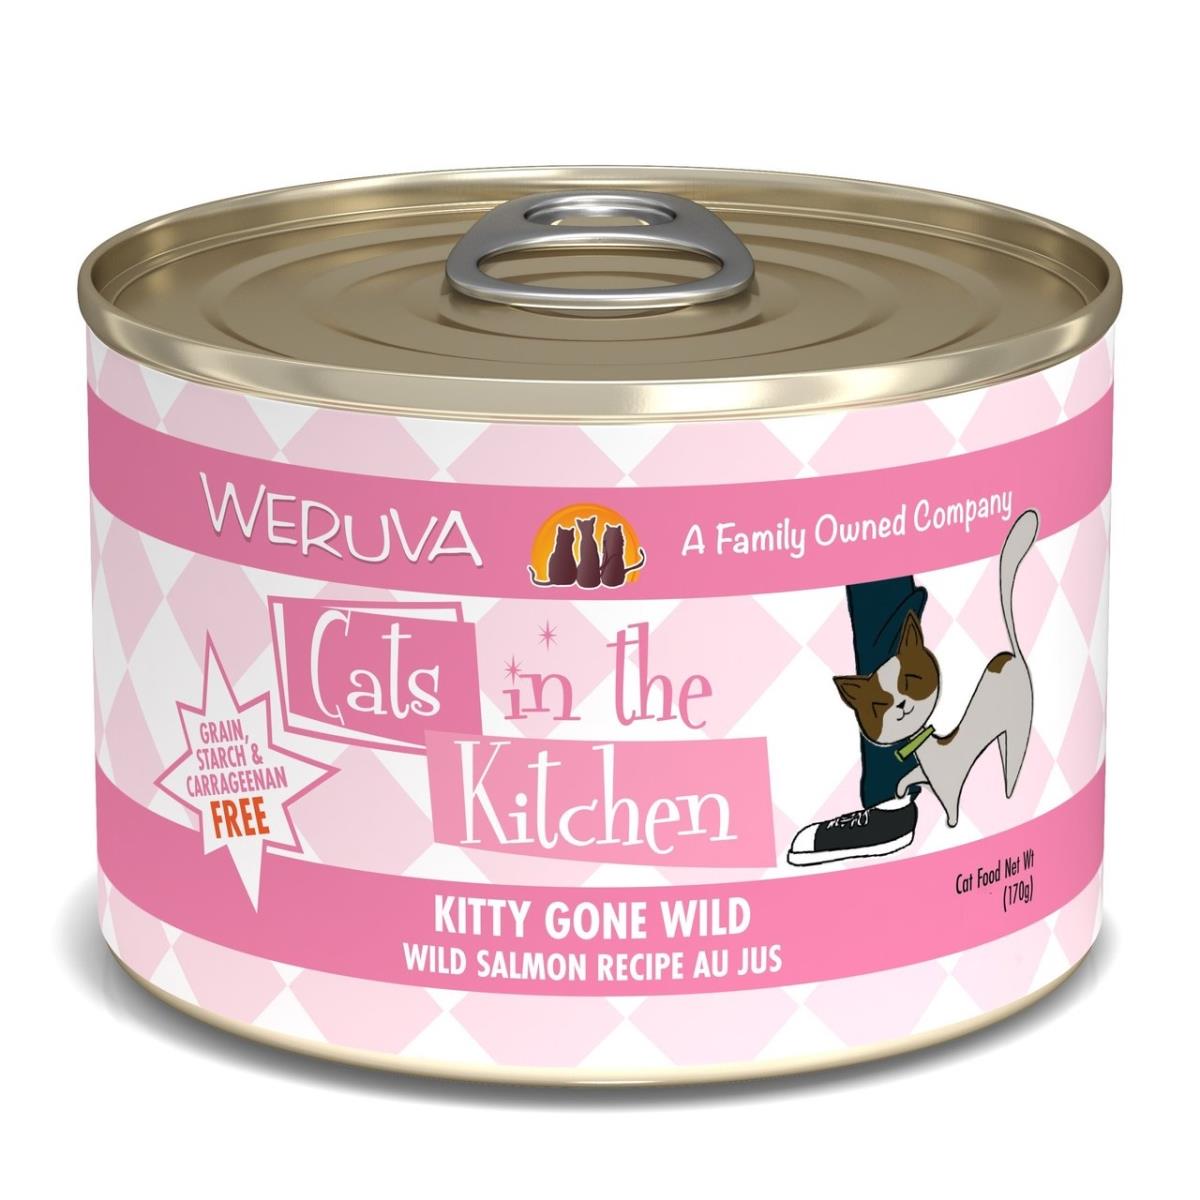 Wu00167 10 Oz The Kitchen Kitty Gone Wild Cat Food - Case Of 12